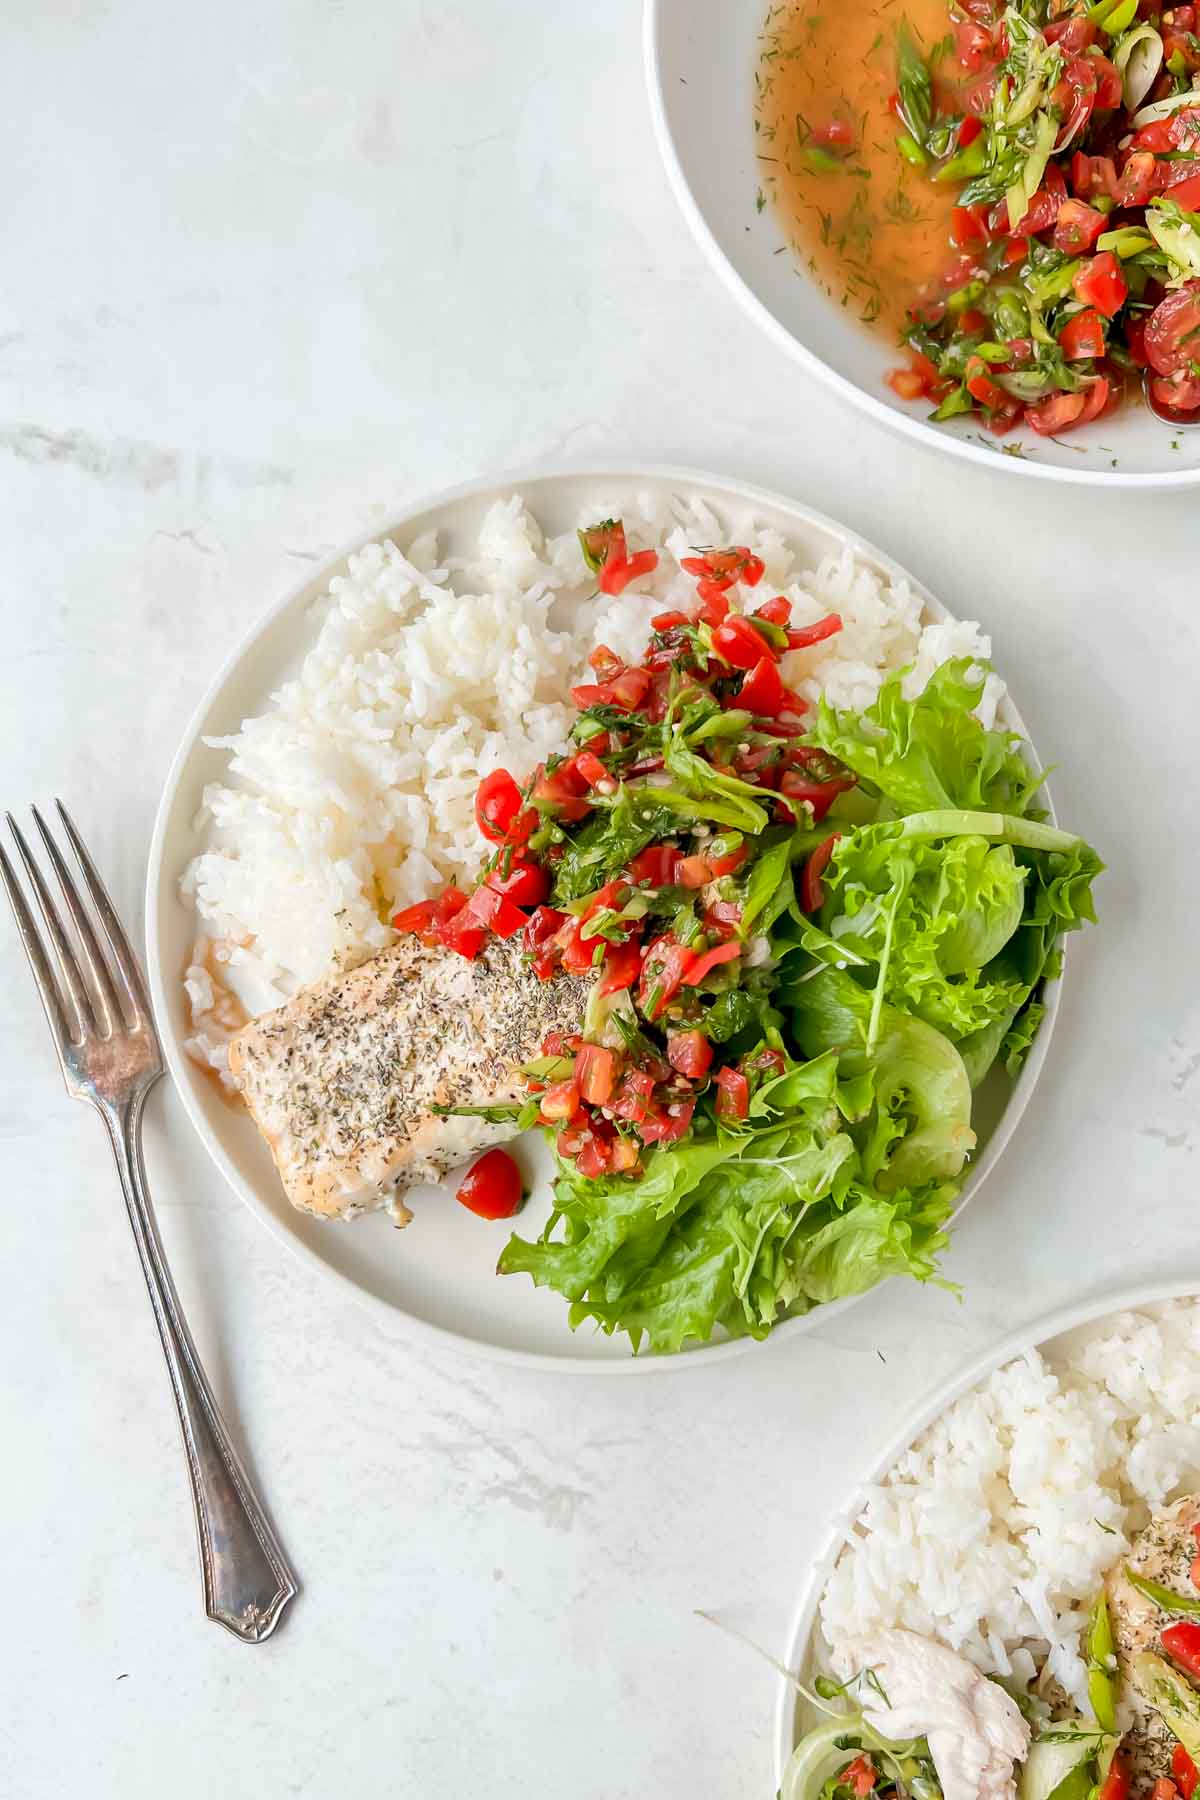 serving plate filled with rice, mahi mahi and greens with tomato relish on top.